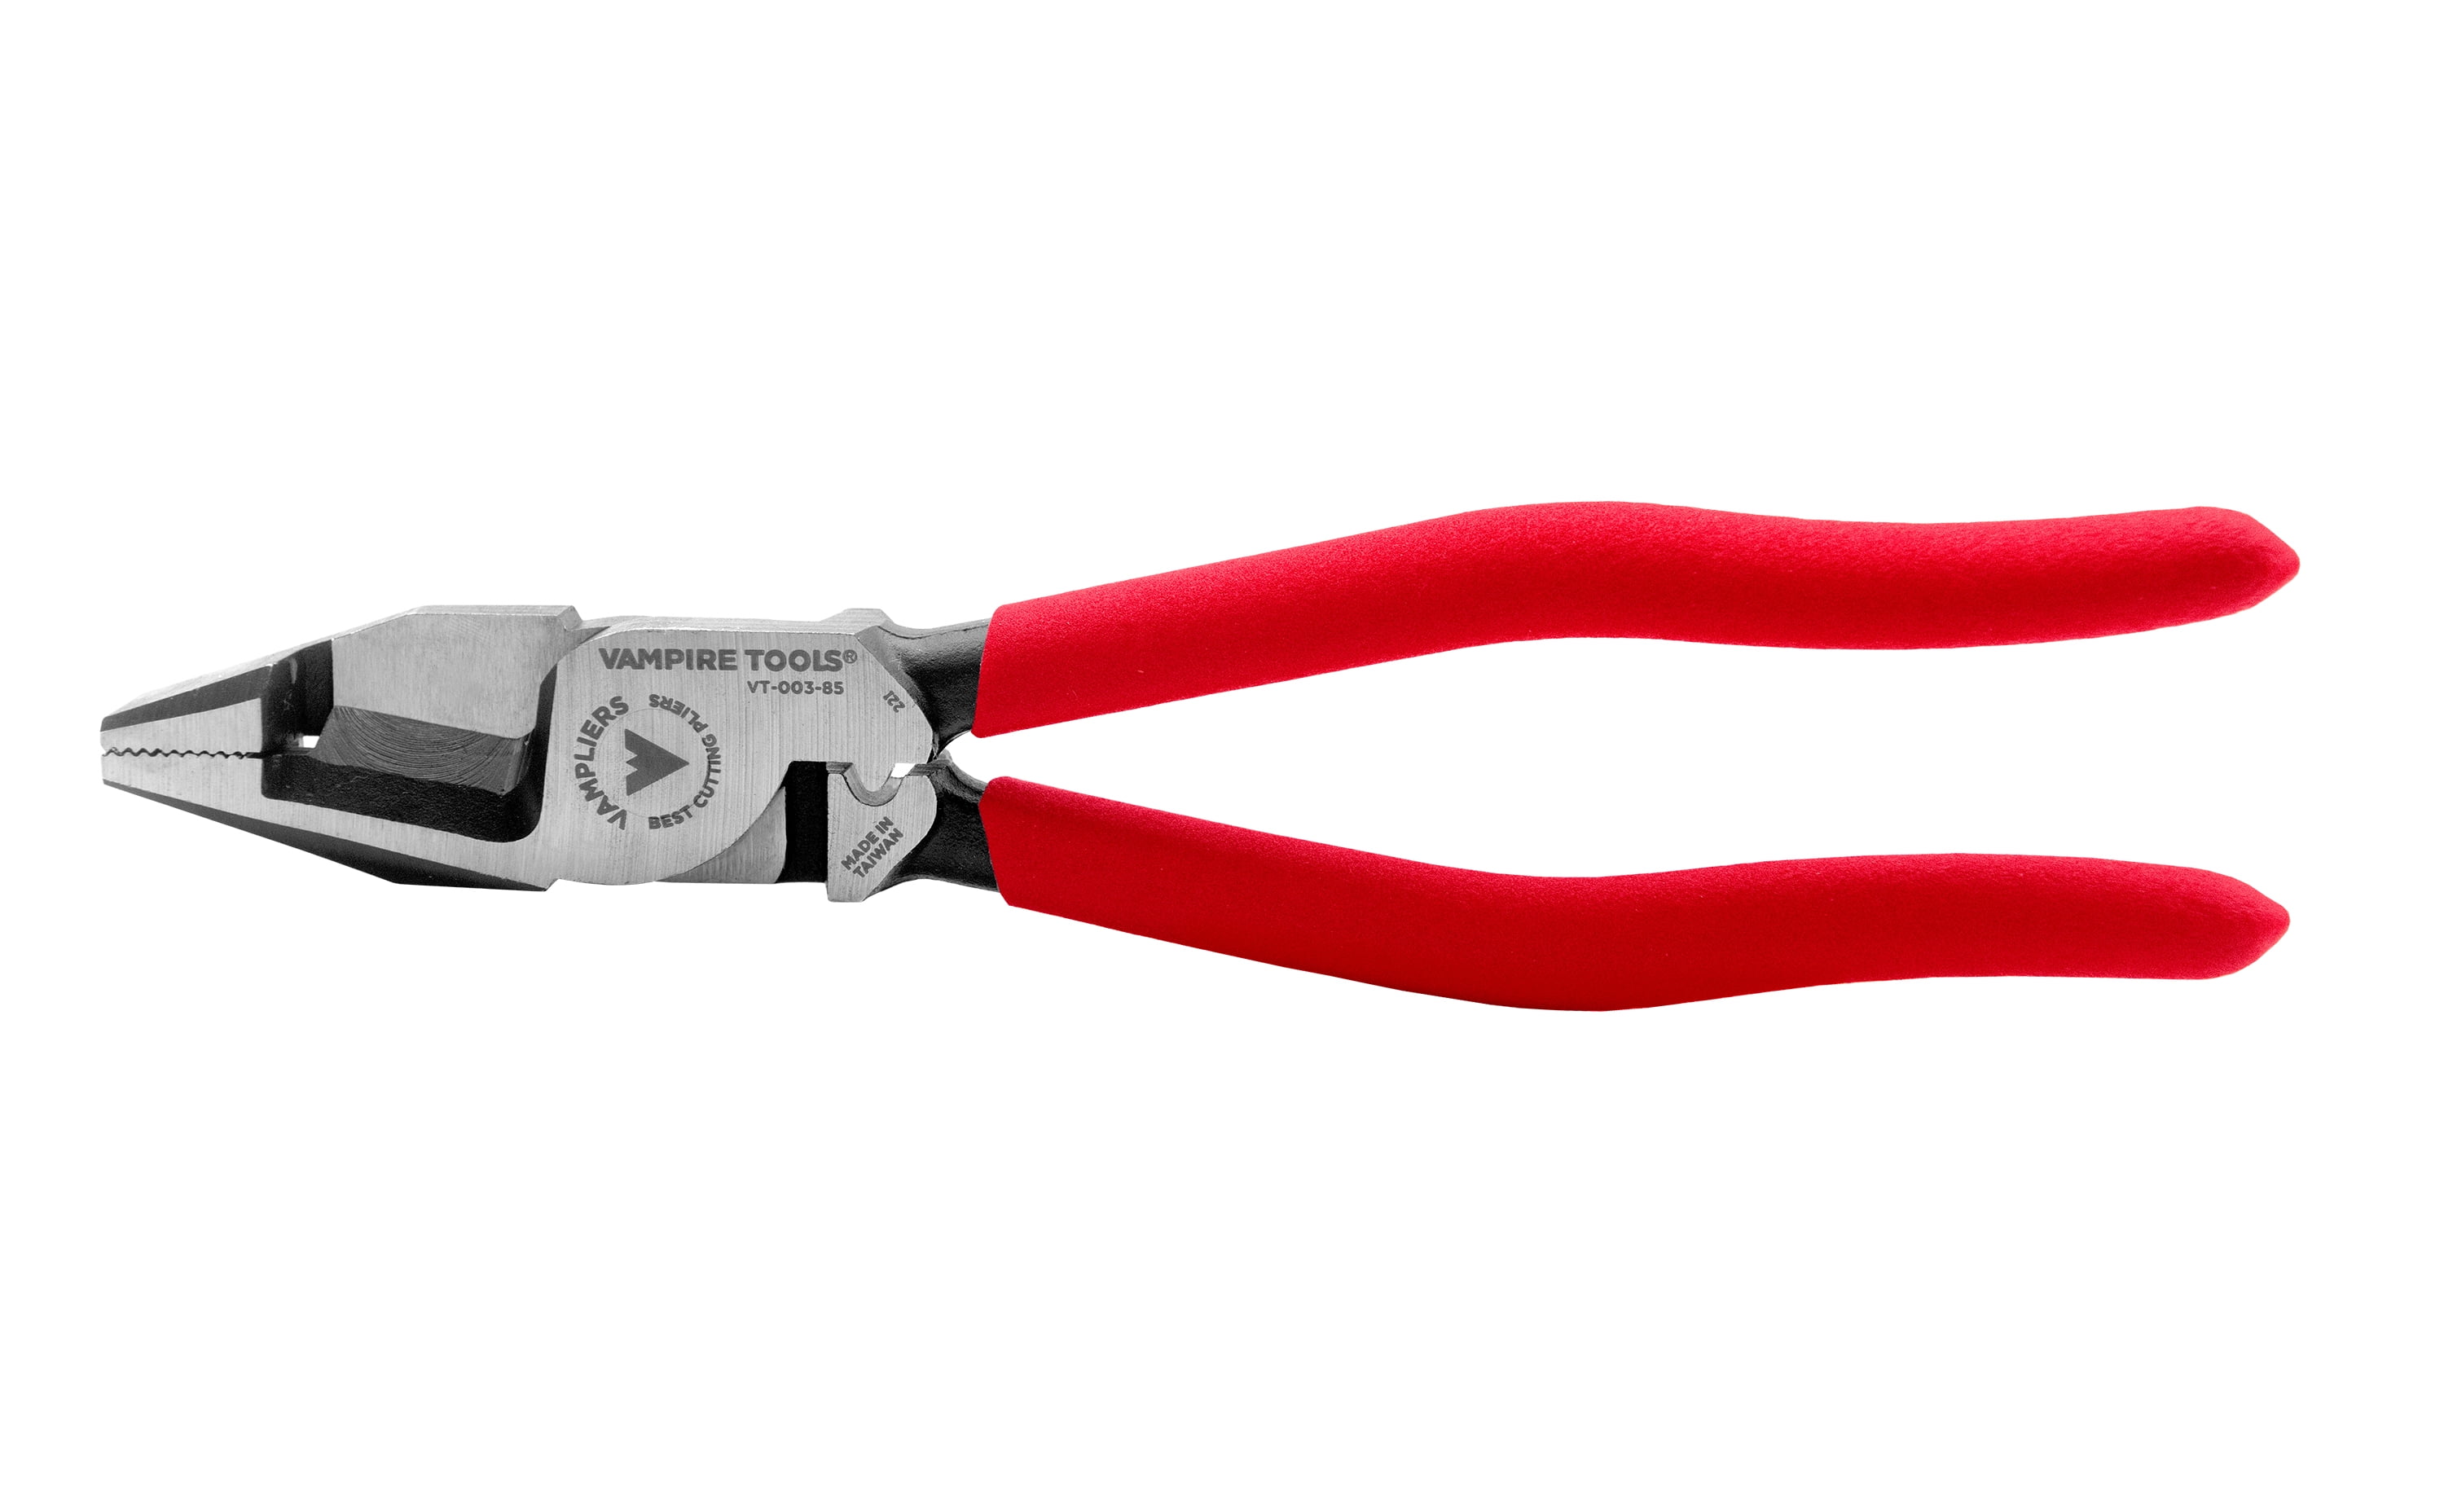 Draper 38896 Safety Wire Twisting Pliers 250mm 10 - ChadsToolbox